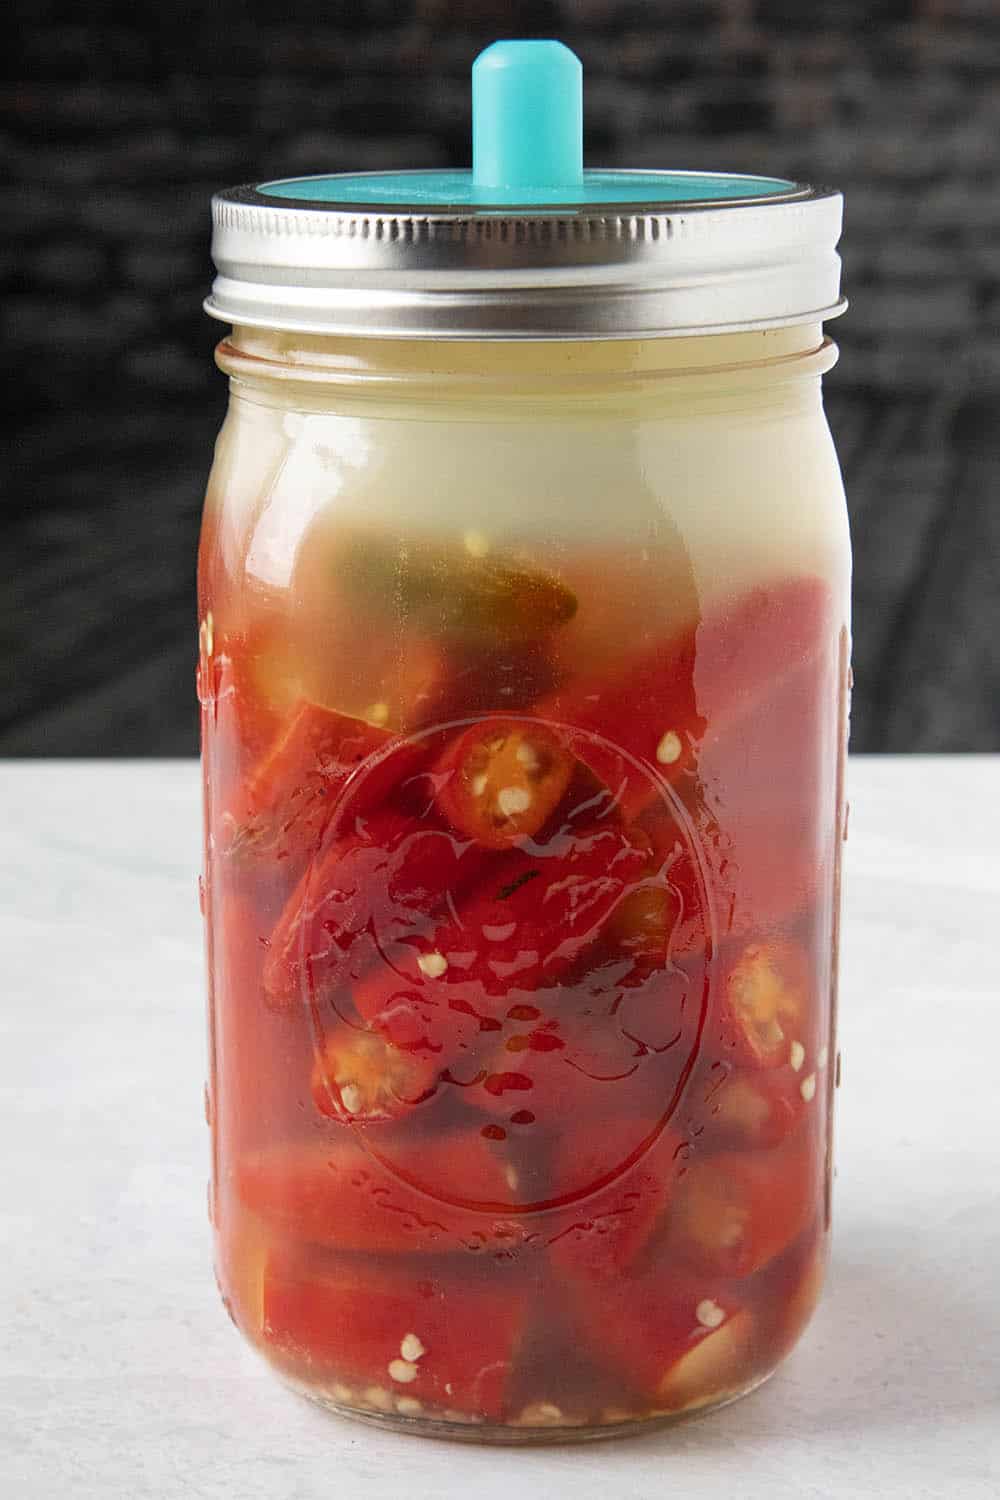 Fermenting red serrano peppers in a jar with brine